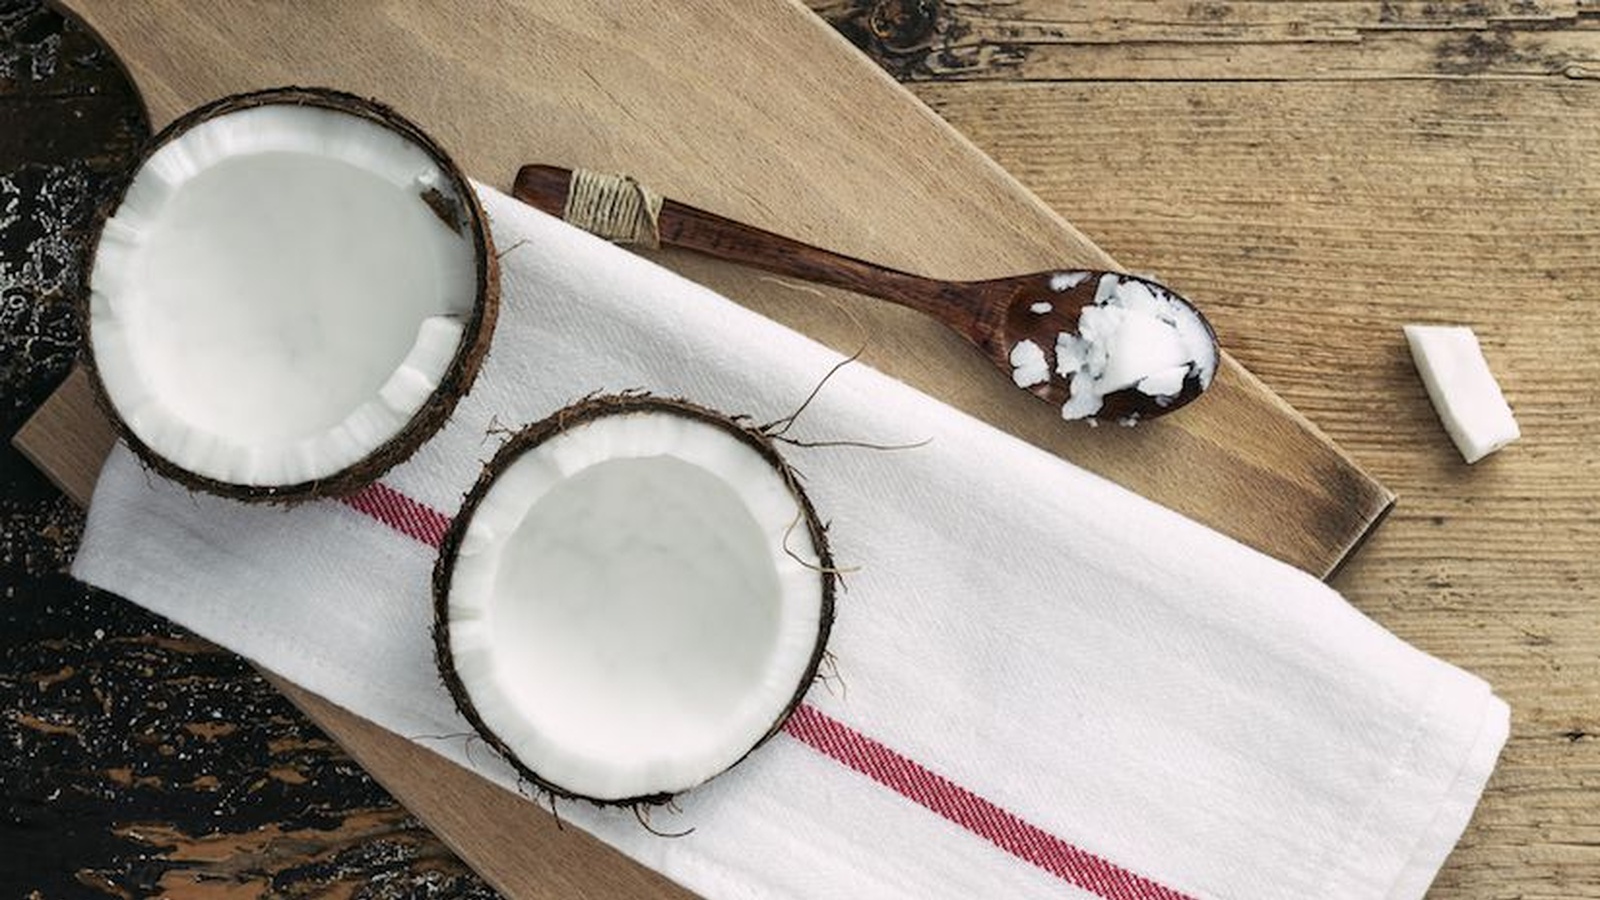 The 7 Health Benefits Of Oil Pulling